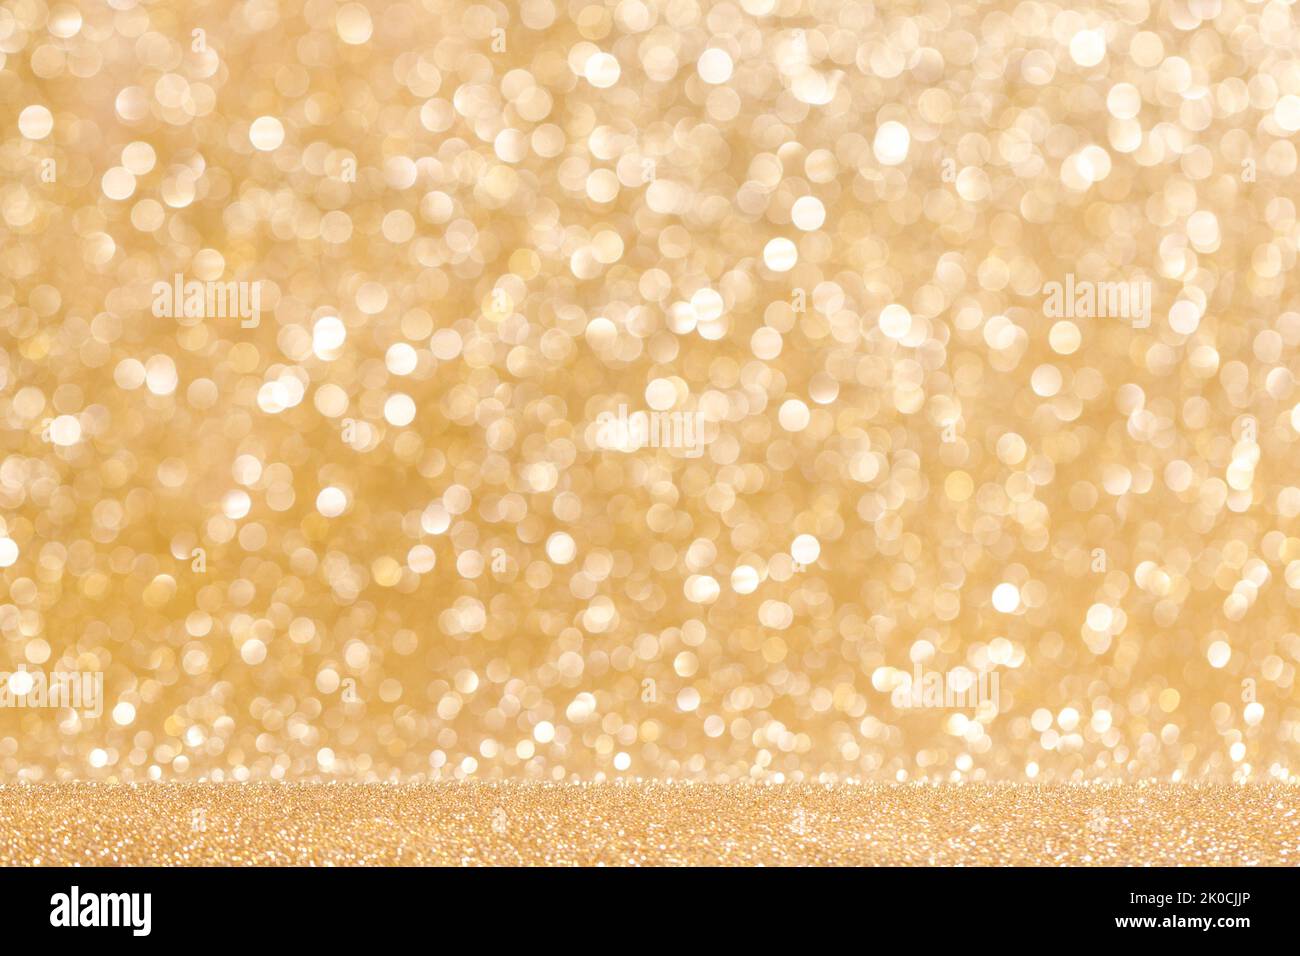 Glitter golden light blurred bokeh background, party holiday Christmas New Year luxury design, copy space for text content Stock Photo